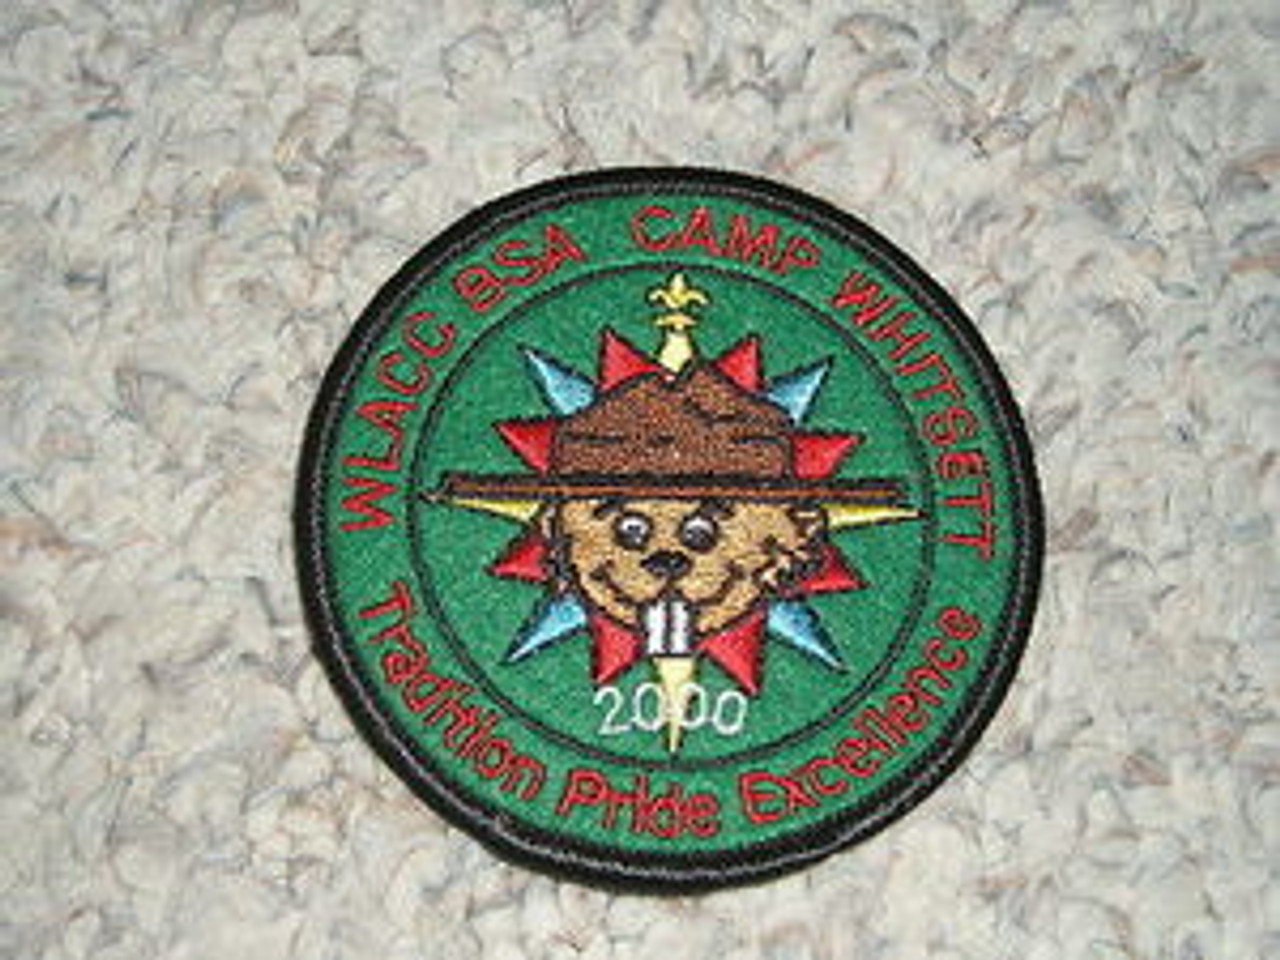 2000 Camp Whitsett Patch - Scout